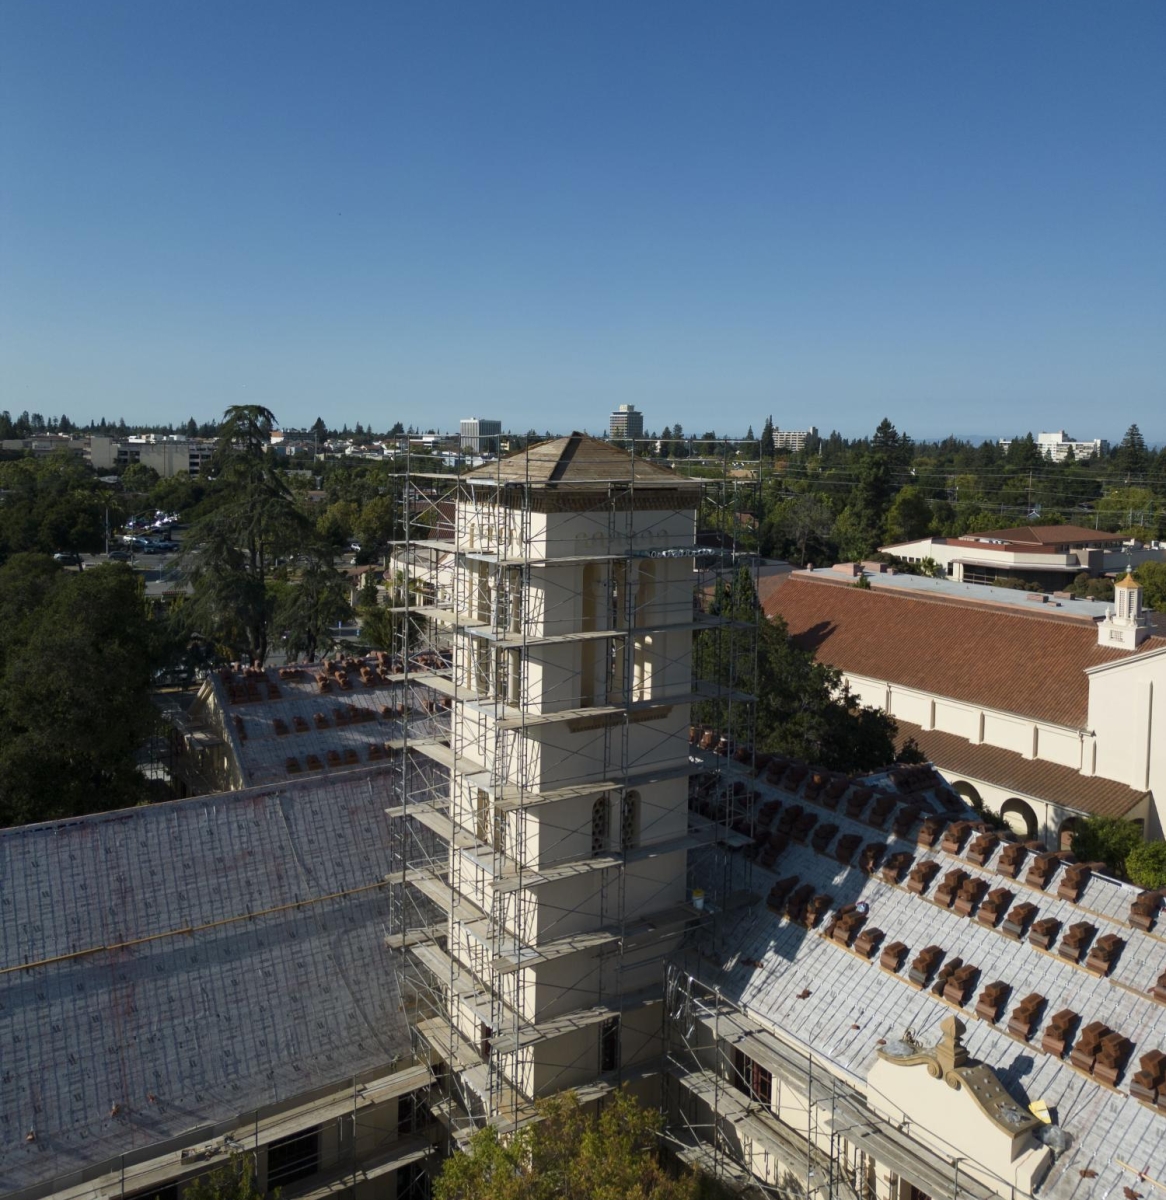 TOWER+OVERVIEW+%E2%80%94+Overlooking+the+top+of+the+Tower+Building%2C+this+drone+photo+shows+the+meticulous+process+of+transforming+the+old+roof+and+the+Palo+Alto+High+School+bell+tower.+%E2%80%9CAt+some+point%2C%E2%80%9D+Assistant+Principal+Jerry+Berkson+said%2C+%E2%80%9Cjust+the+infrastructure+needs+to+be+taken+care+of.%E2%80%9D+Photo%3A++Kensie+Pao